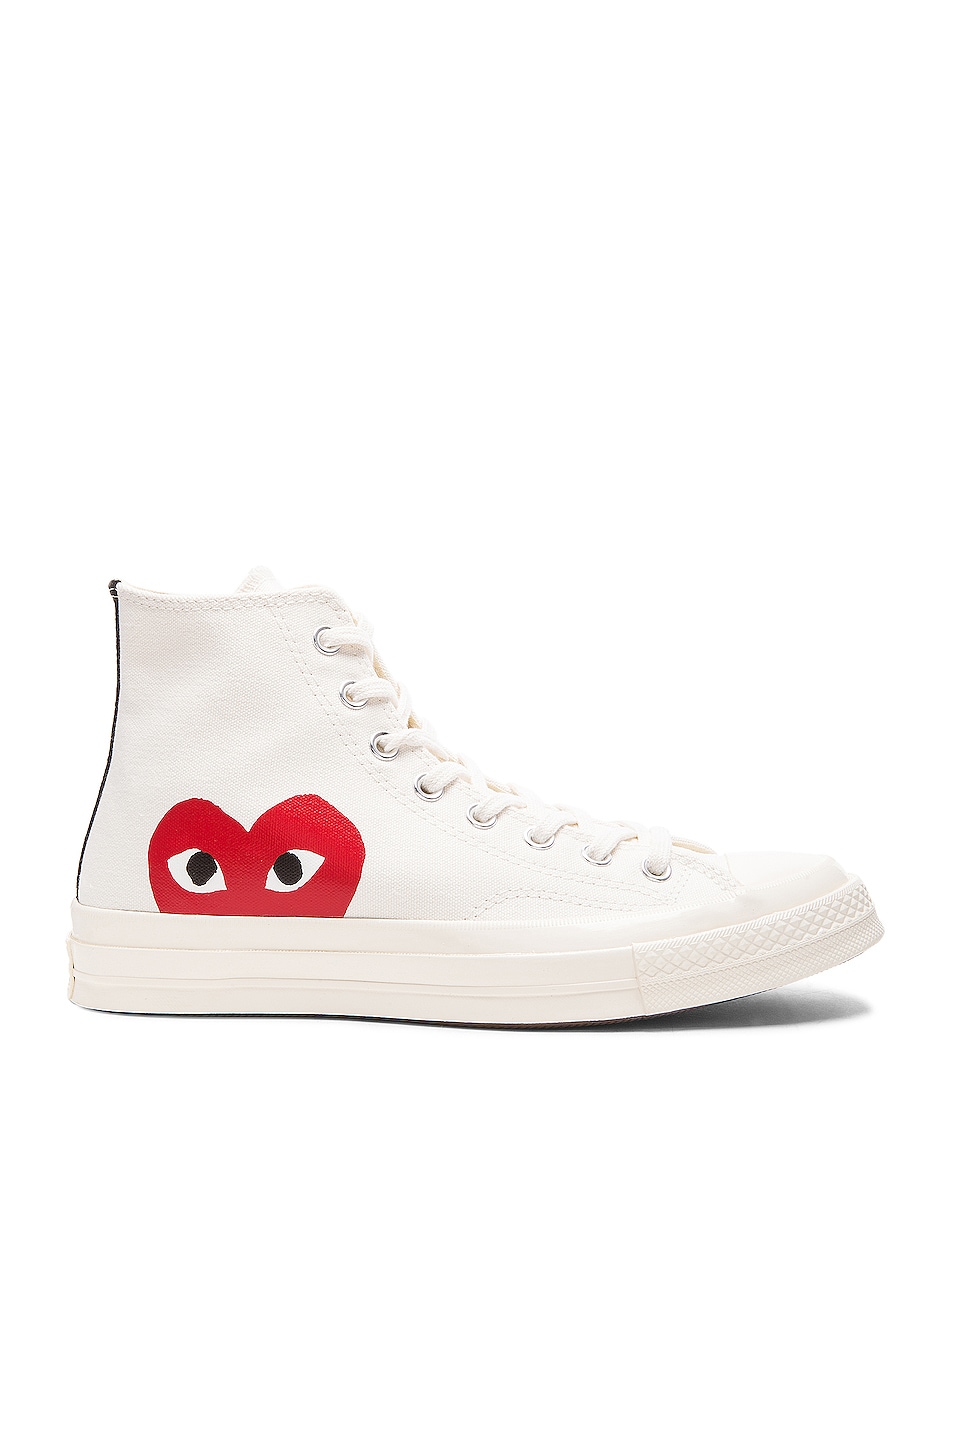 COMME des GARCONS PLAY Converse Large Emblem High Top Canvas Sneakers in  White | FWRD